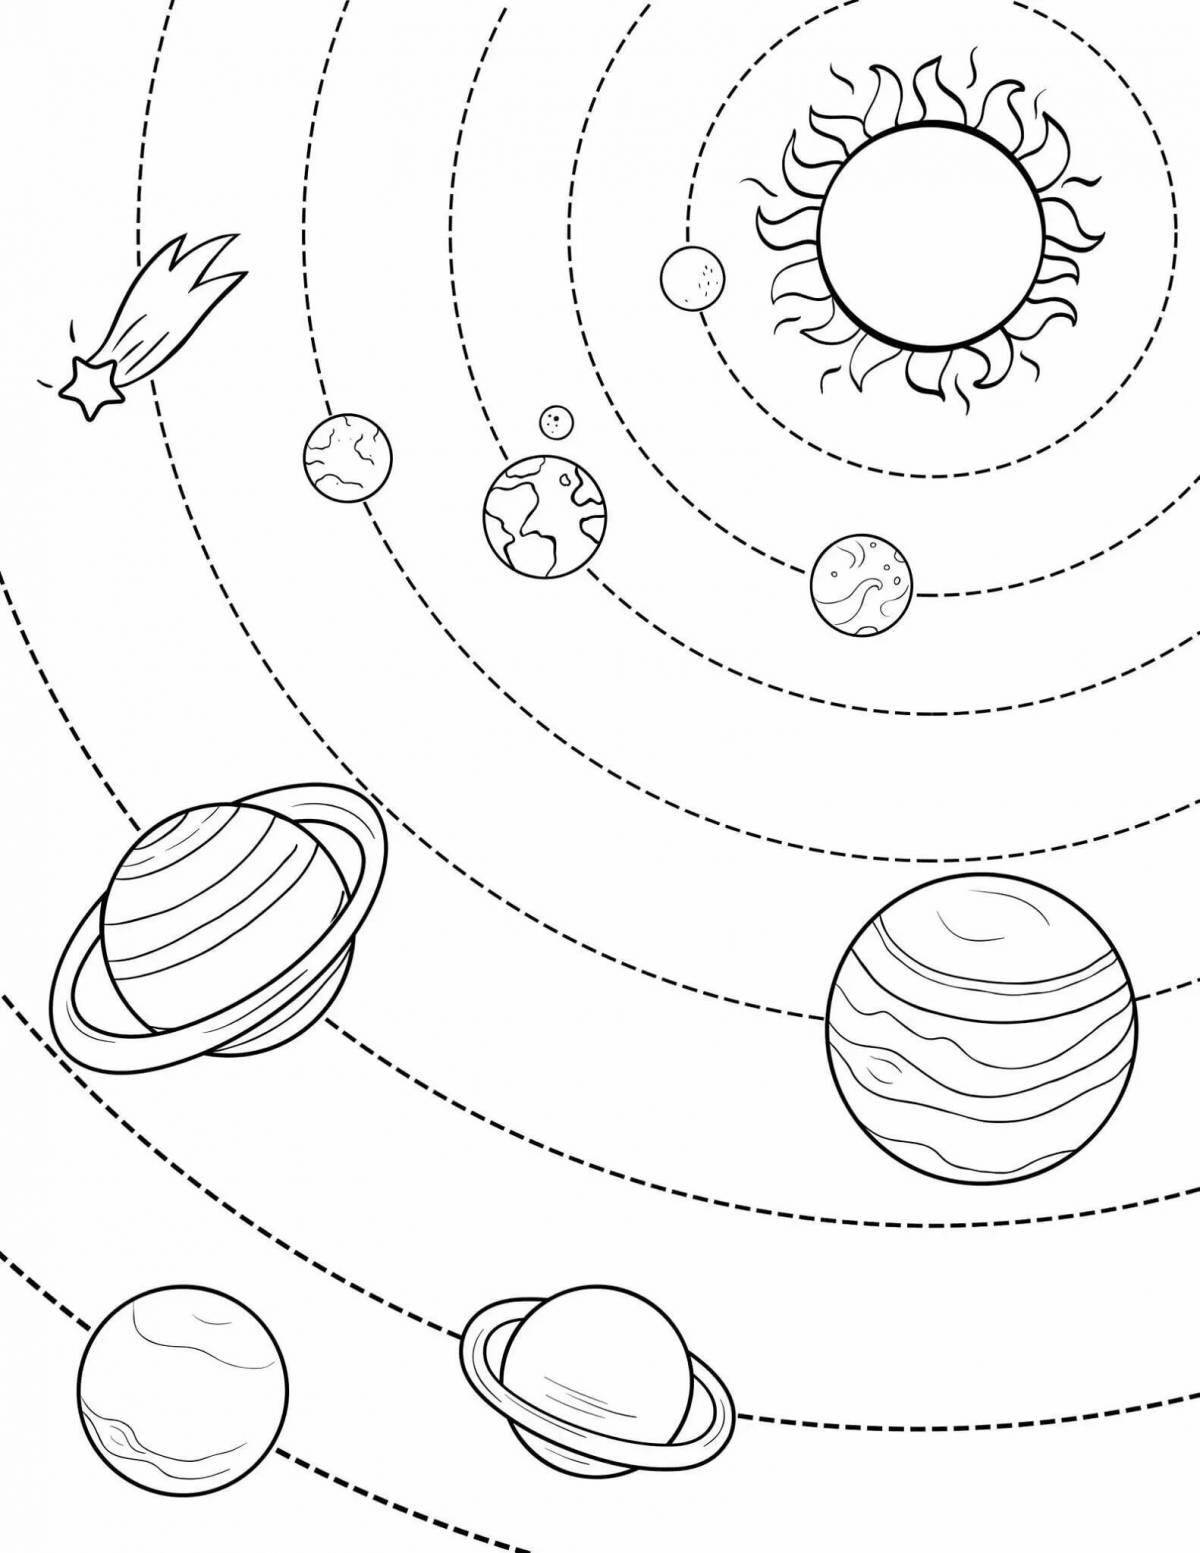 An amazing coloring of the planets of the solar system in order from the sun